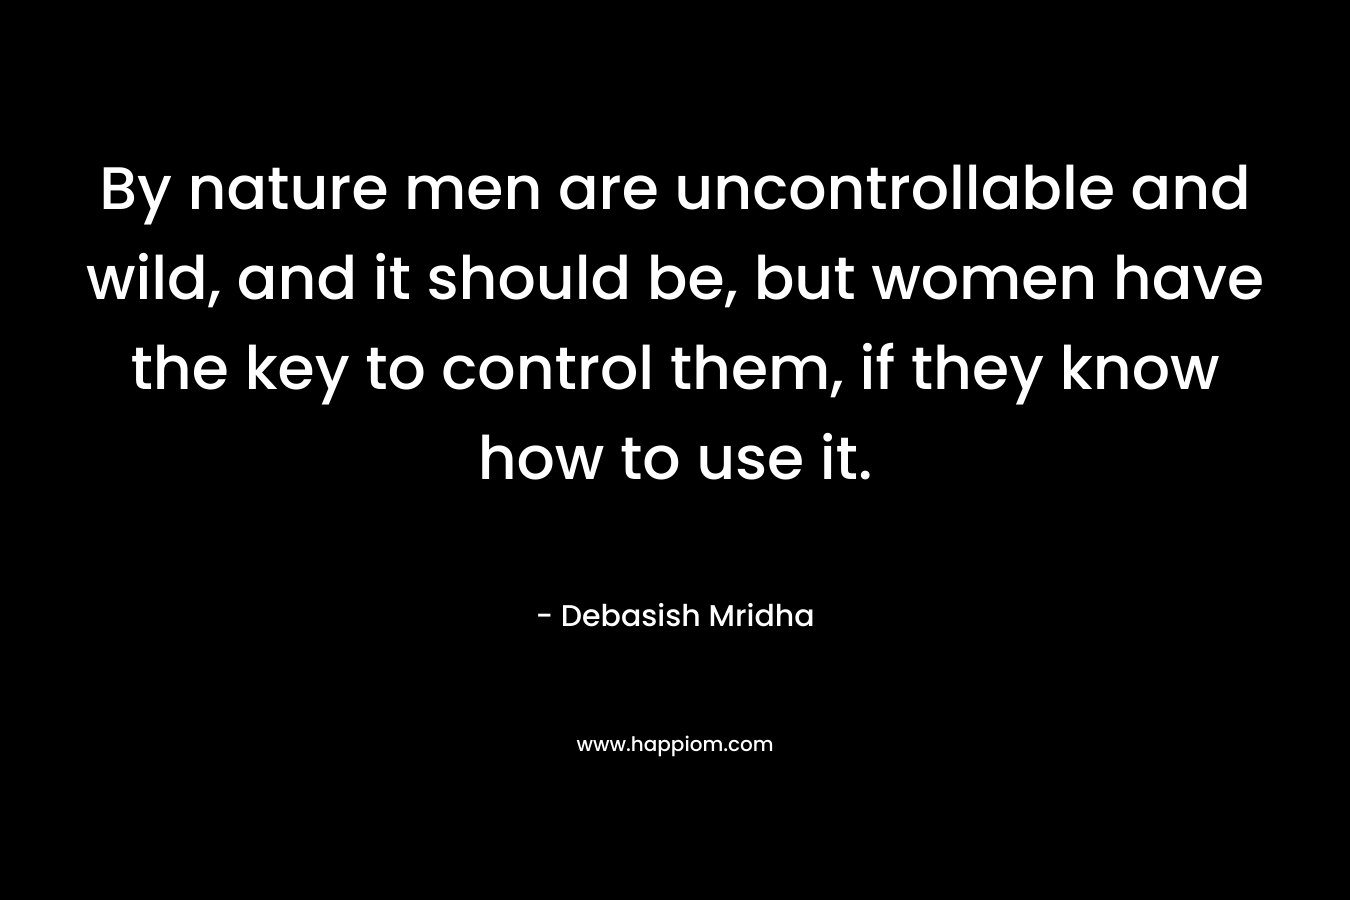 By nature men are uncontrollable and wild, and it should be, but women have the key to control them, if they know how to use it.